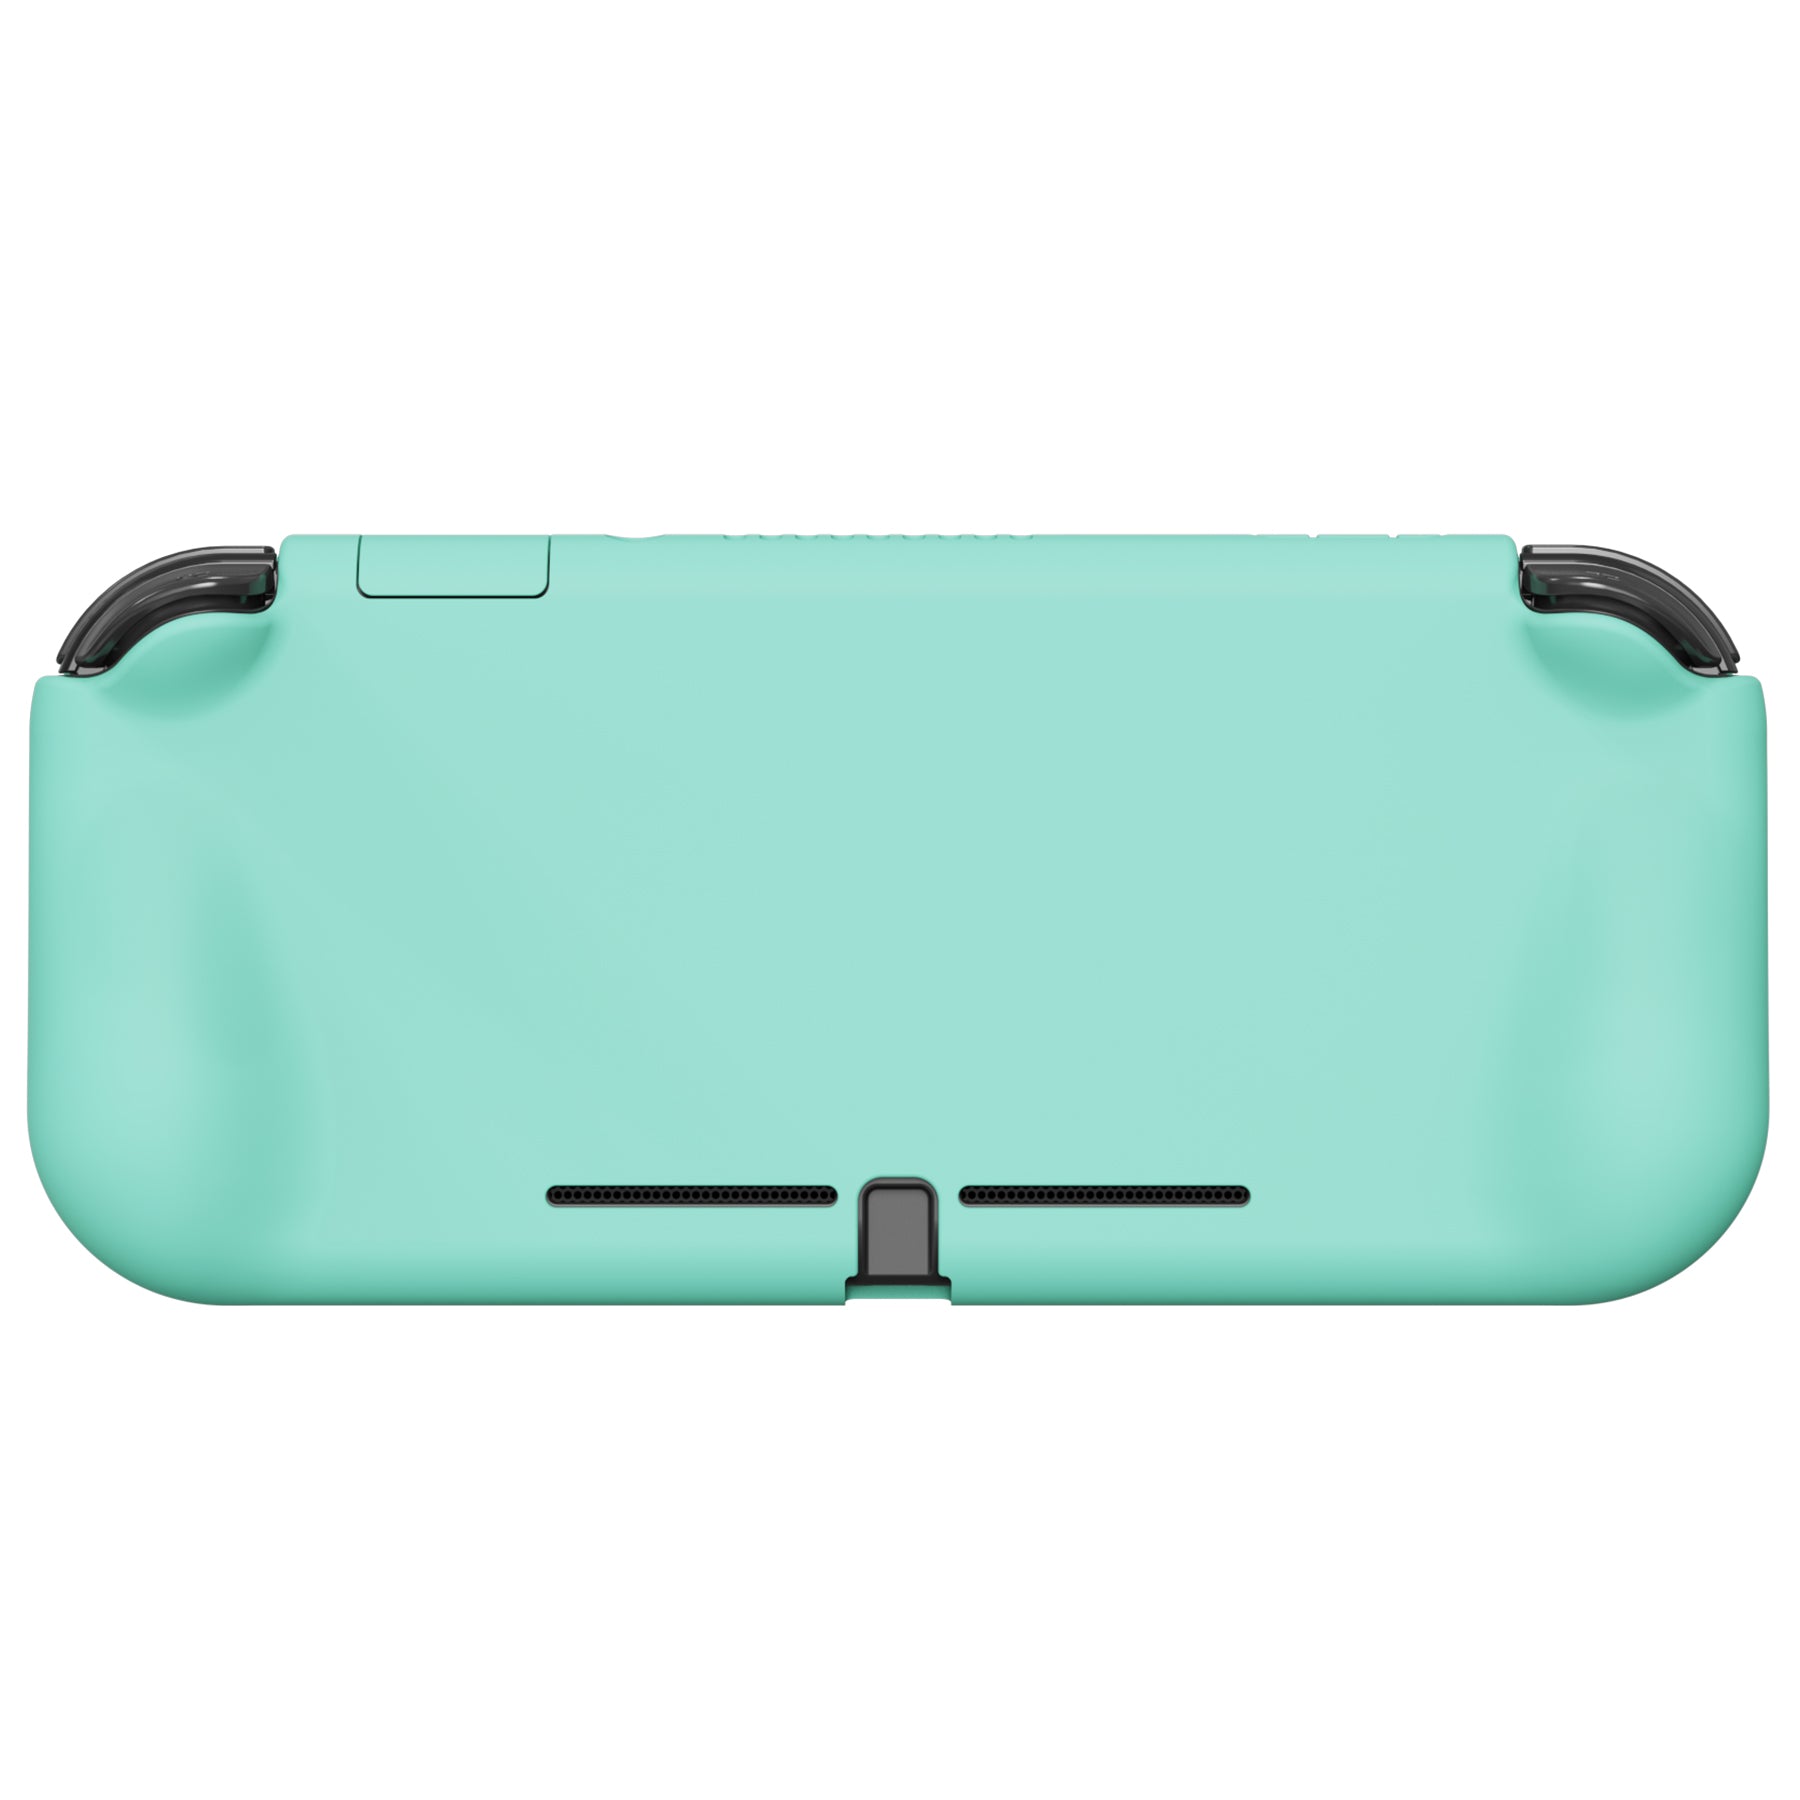 PlayVital ZealProtect Protective Case for Nintendo Switch Lite, Hard Shell Ergonomic Grip Cover for Nintendo Switch Lite w/Screen Protector & Thumb Grip Caps & Button Caps - Misty Green - PSLYP3005 playvital